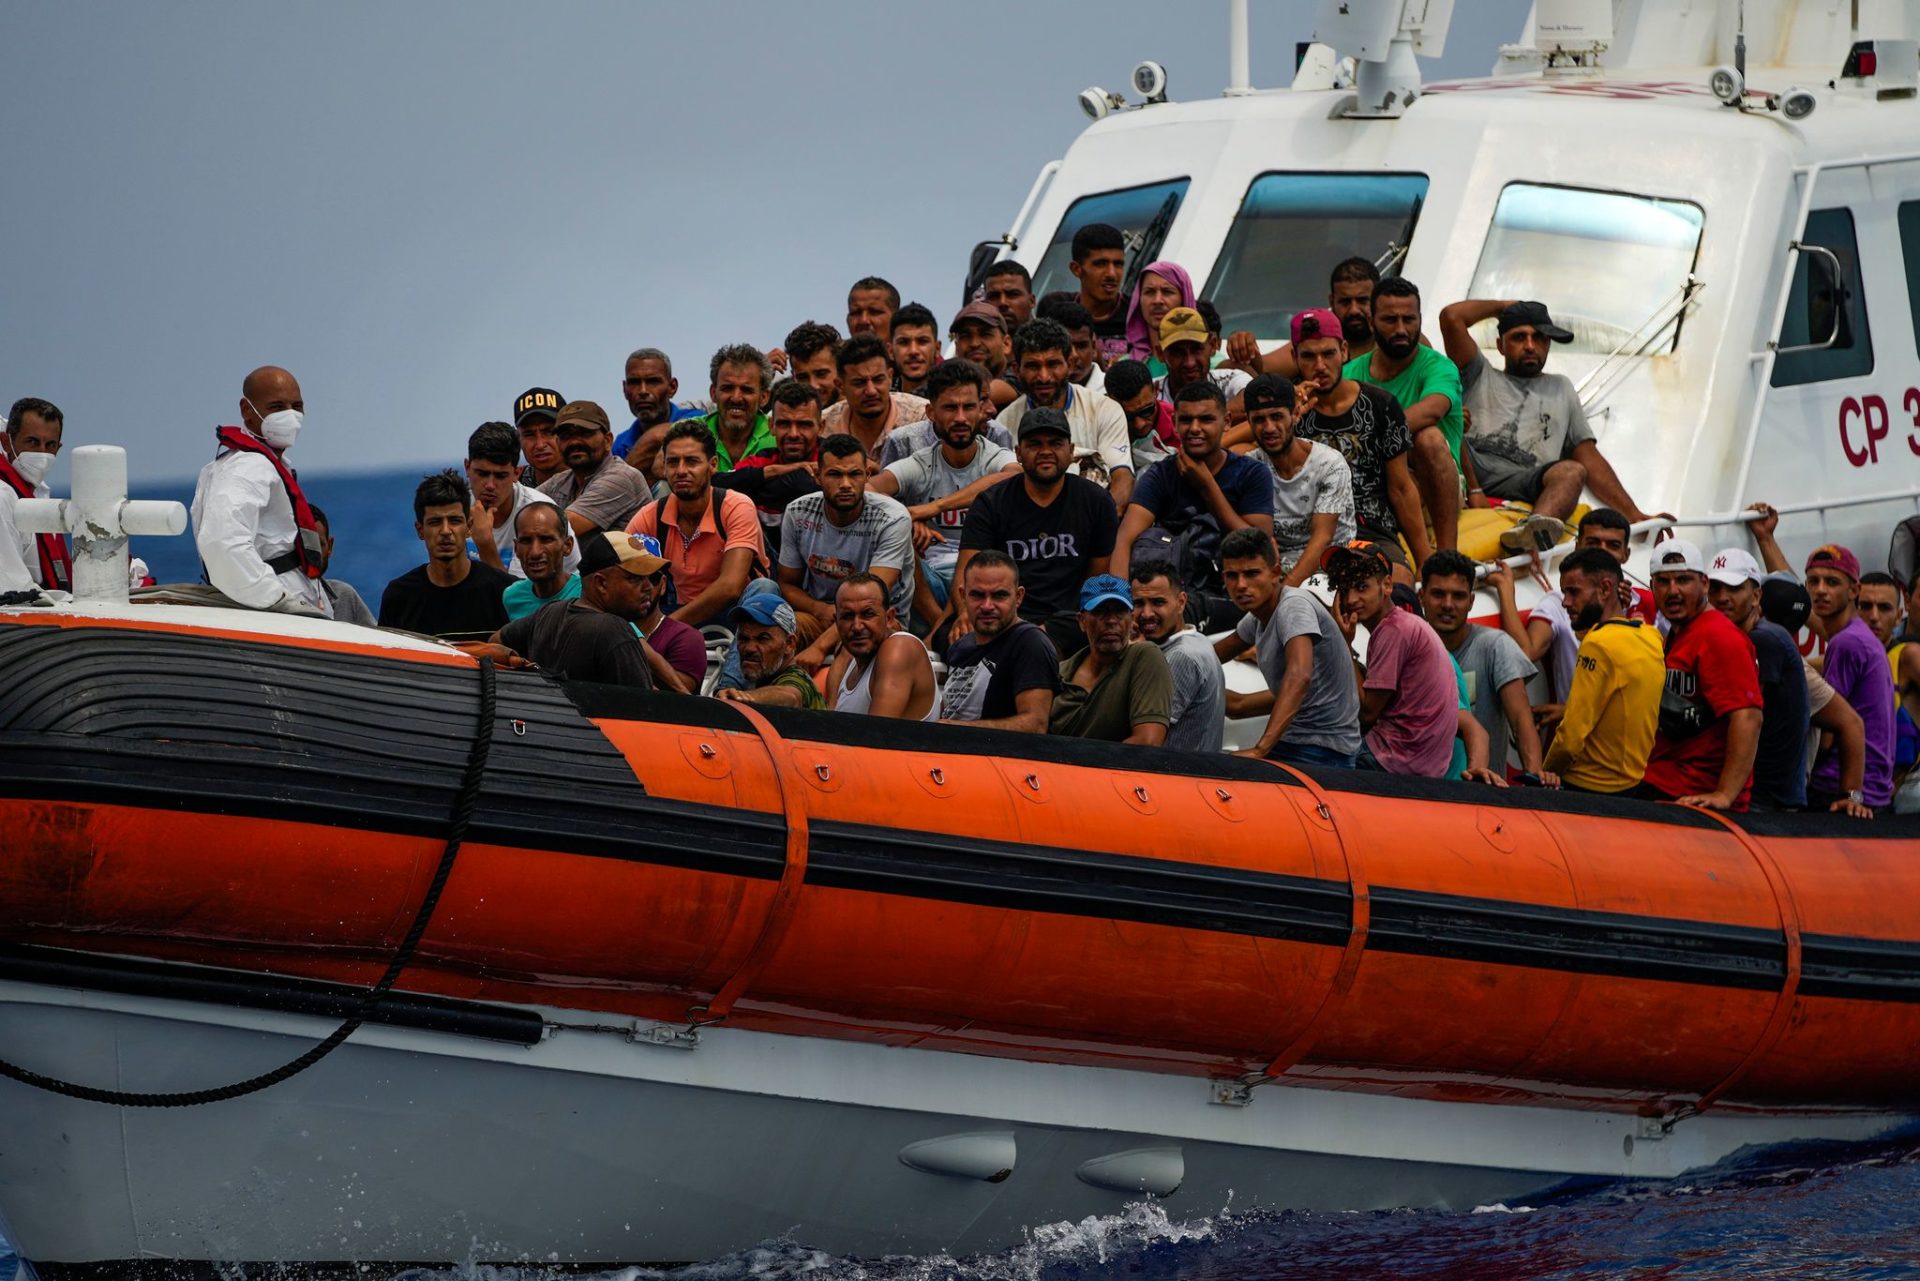 Is Europe ready for a new wave of migration?